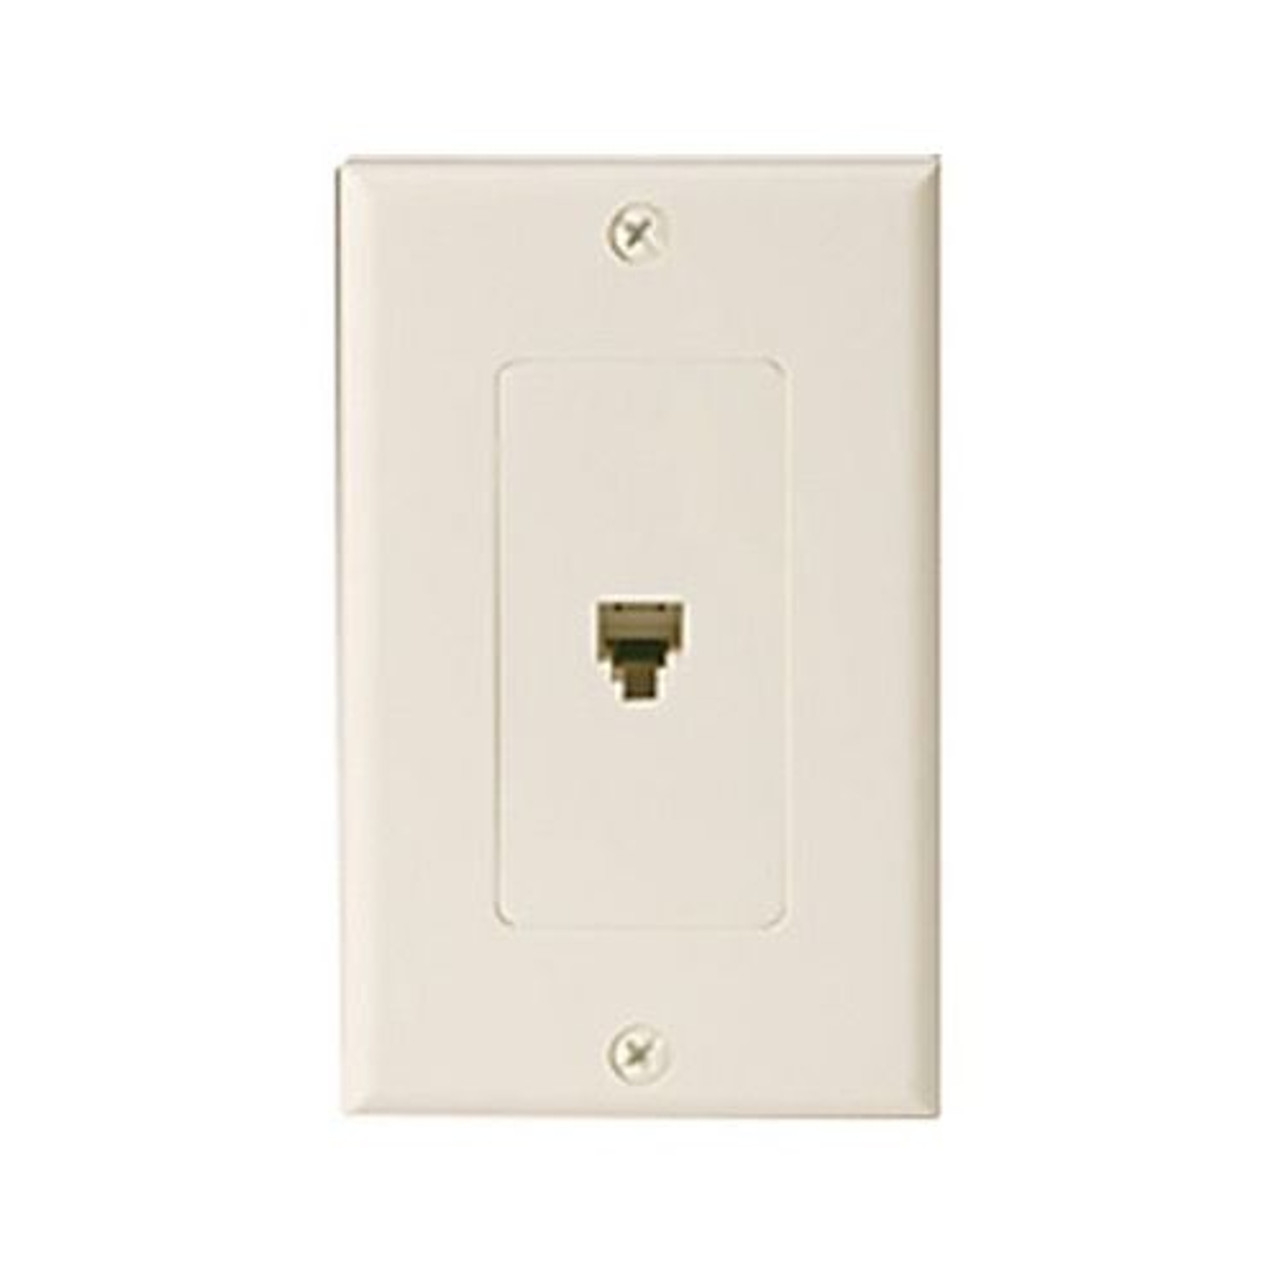 Steren 300-003IV 4-Conductor Wall Plate Jack Ivory Decorator Single Phone Wall Plate 6P4C Jack Modular RJ11 Duplex Telephone Flush Mount Line Cord Audio Data Signal 1 Outlet, Part # 300003-IV